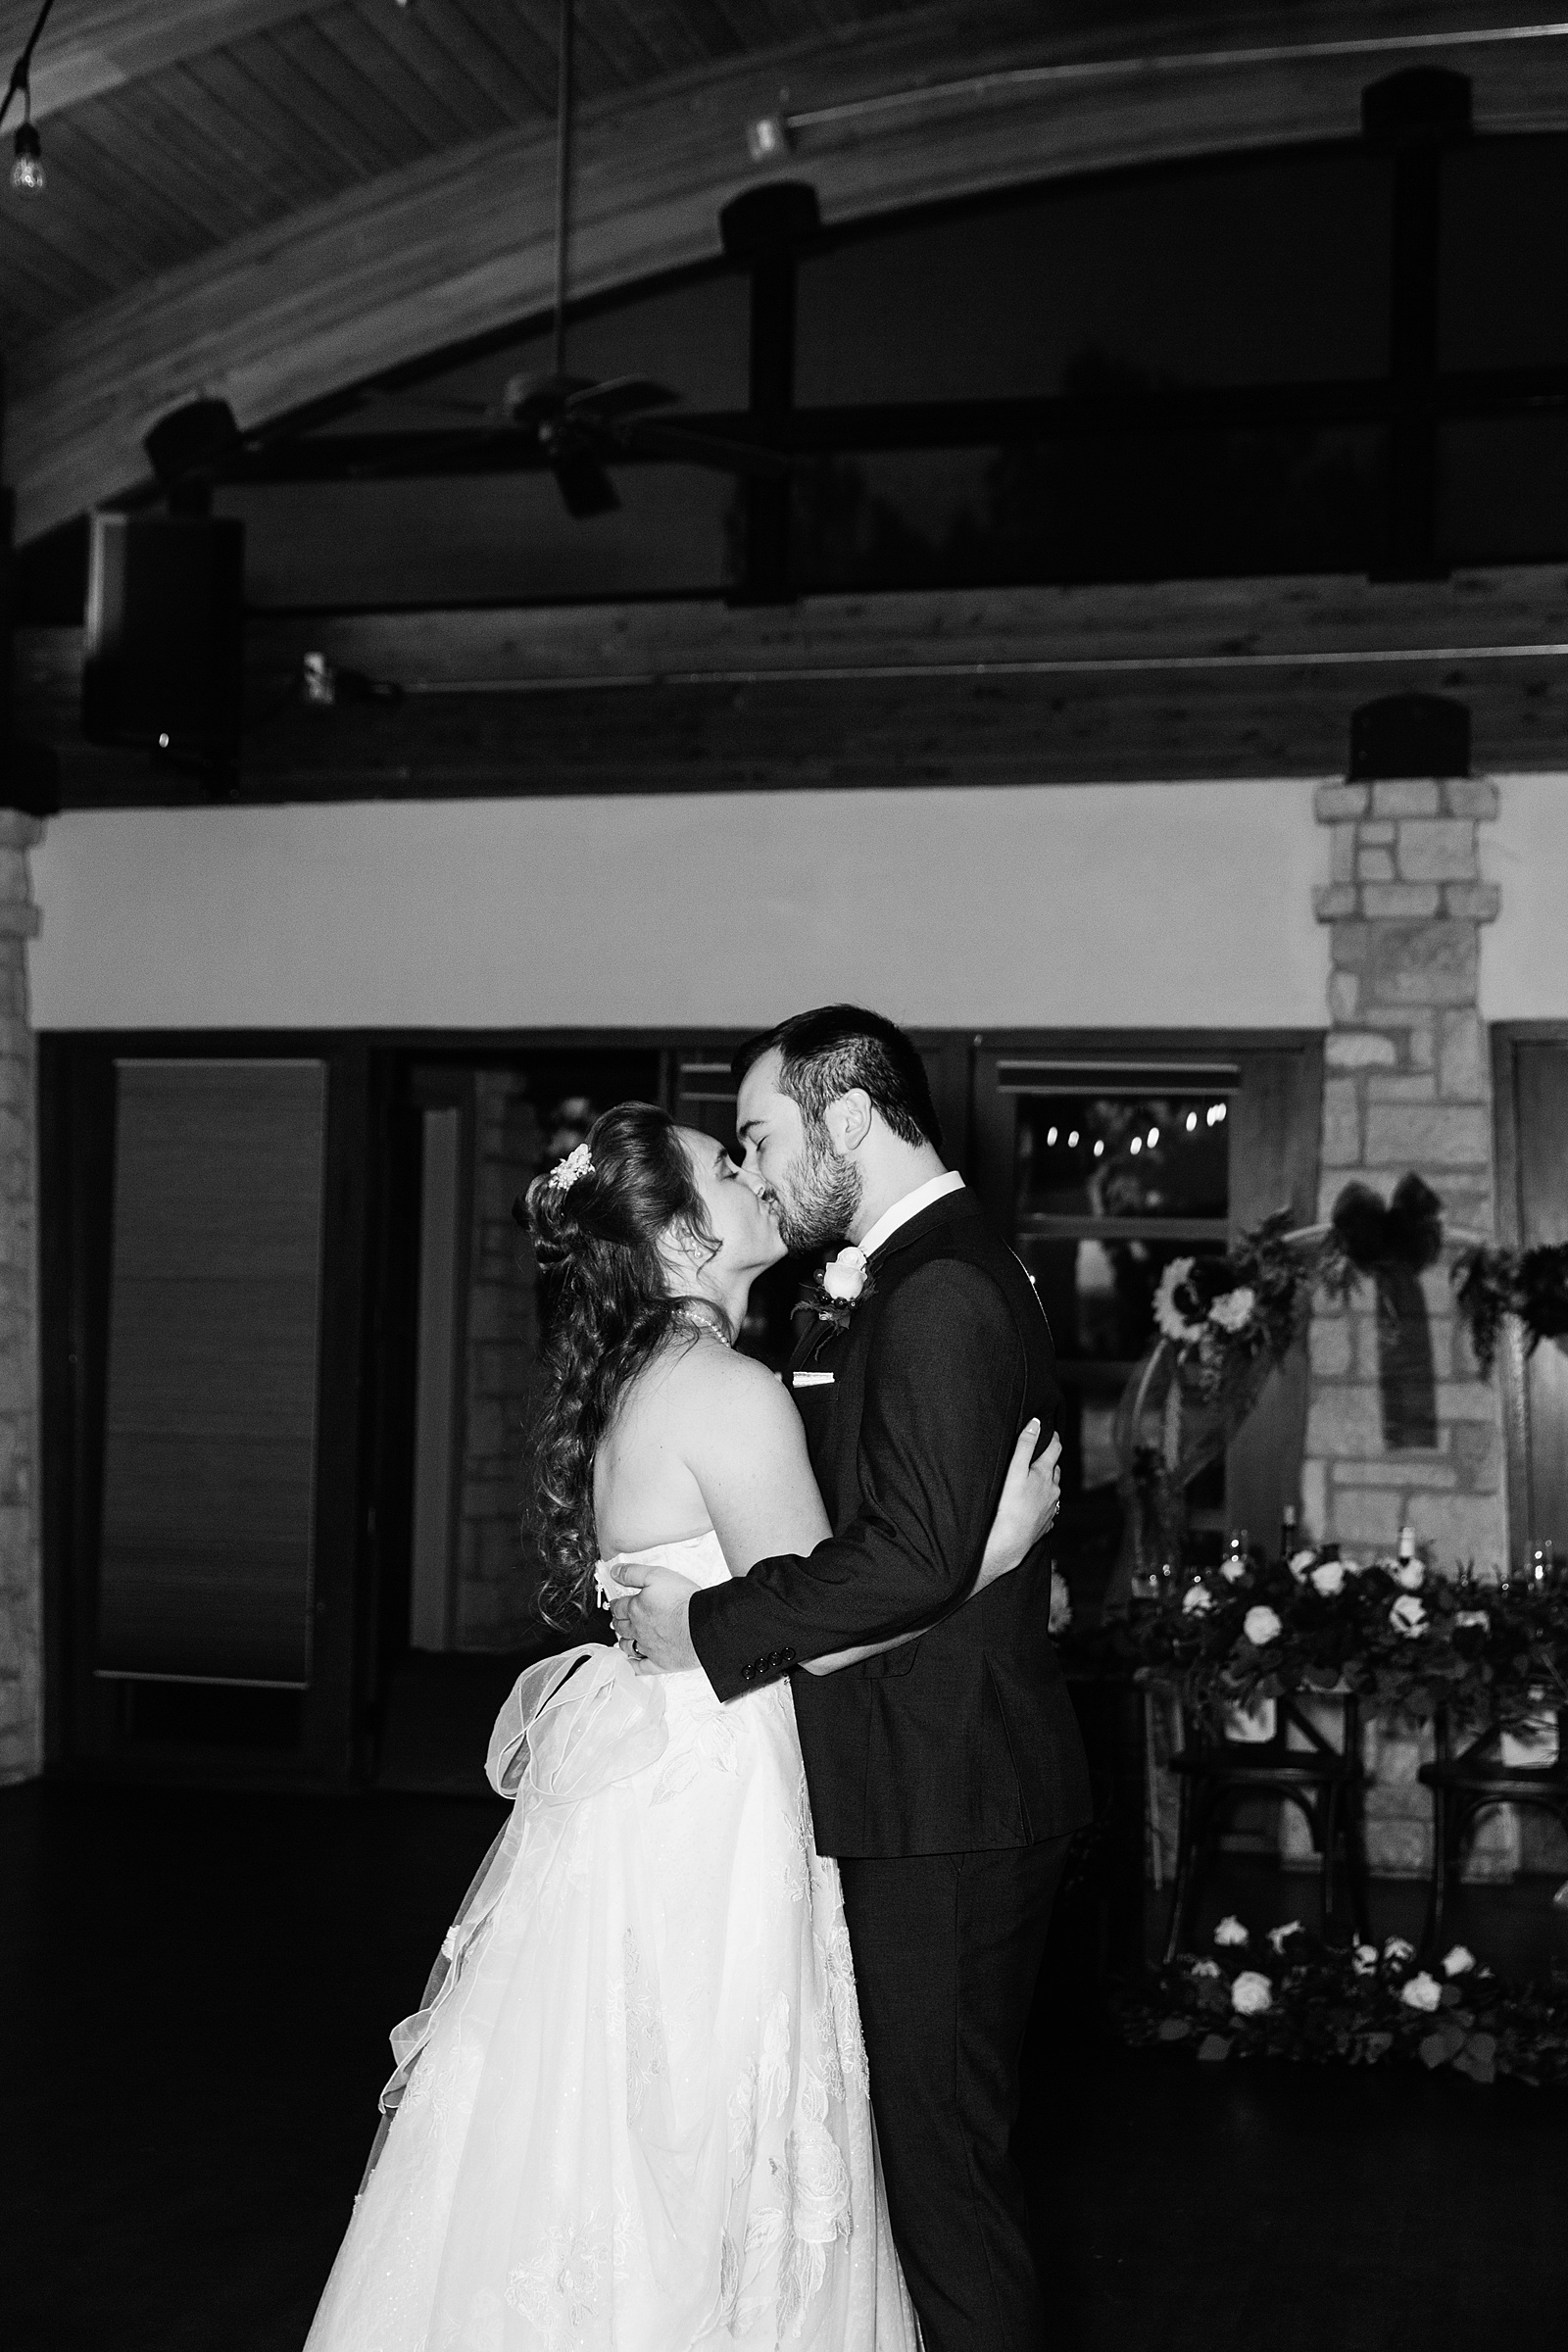 Bride and Groom sharing first dance at their Ocotillo Oasis wedding reception by Arizona wedding photographer PMA Photography.